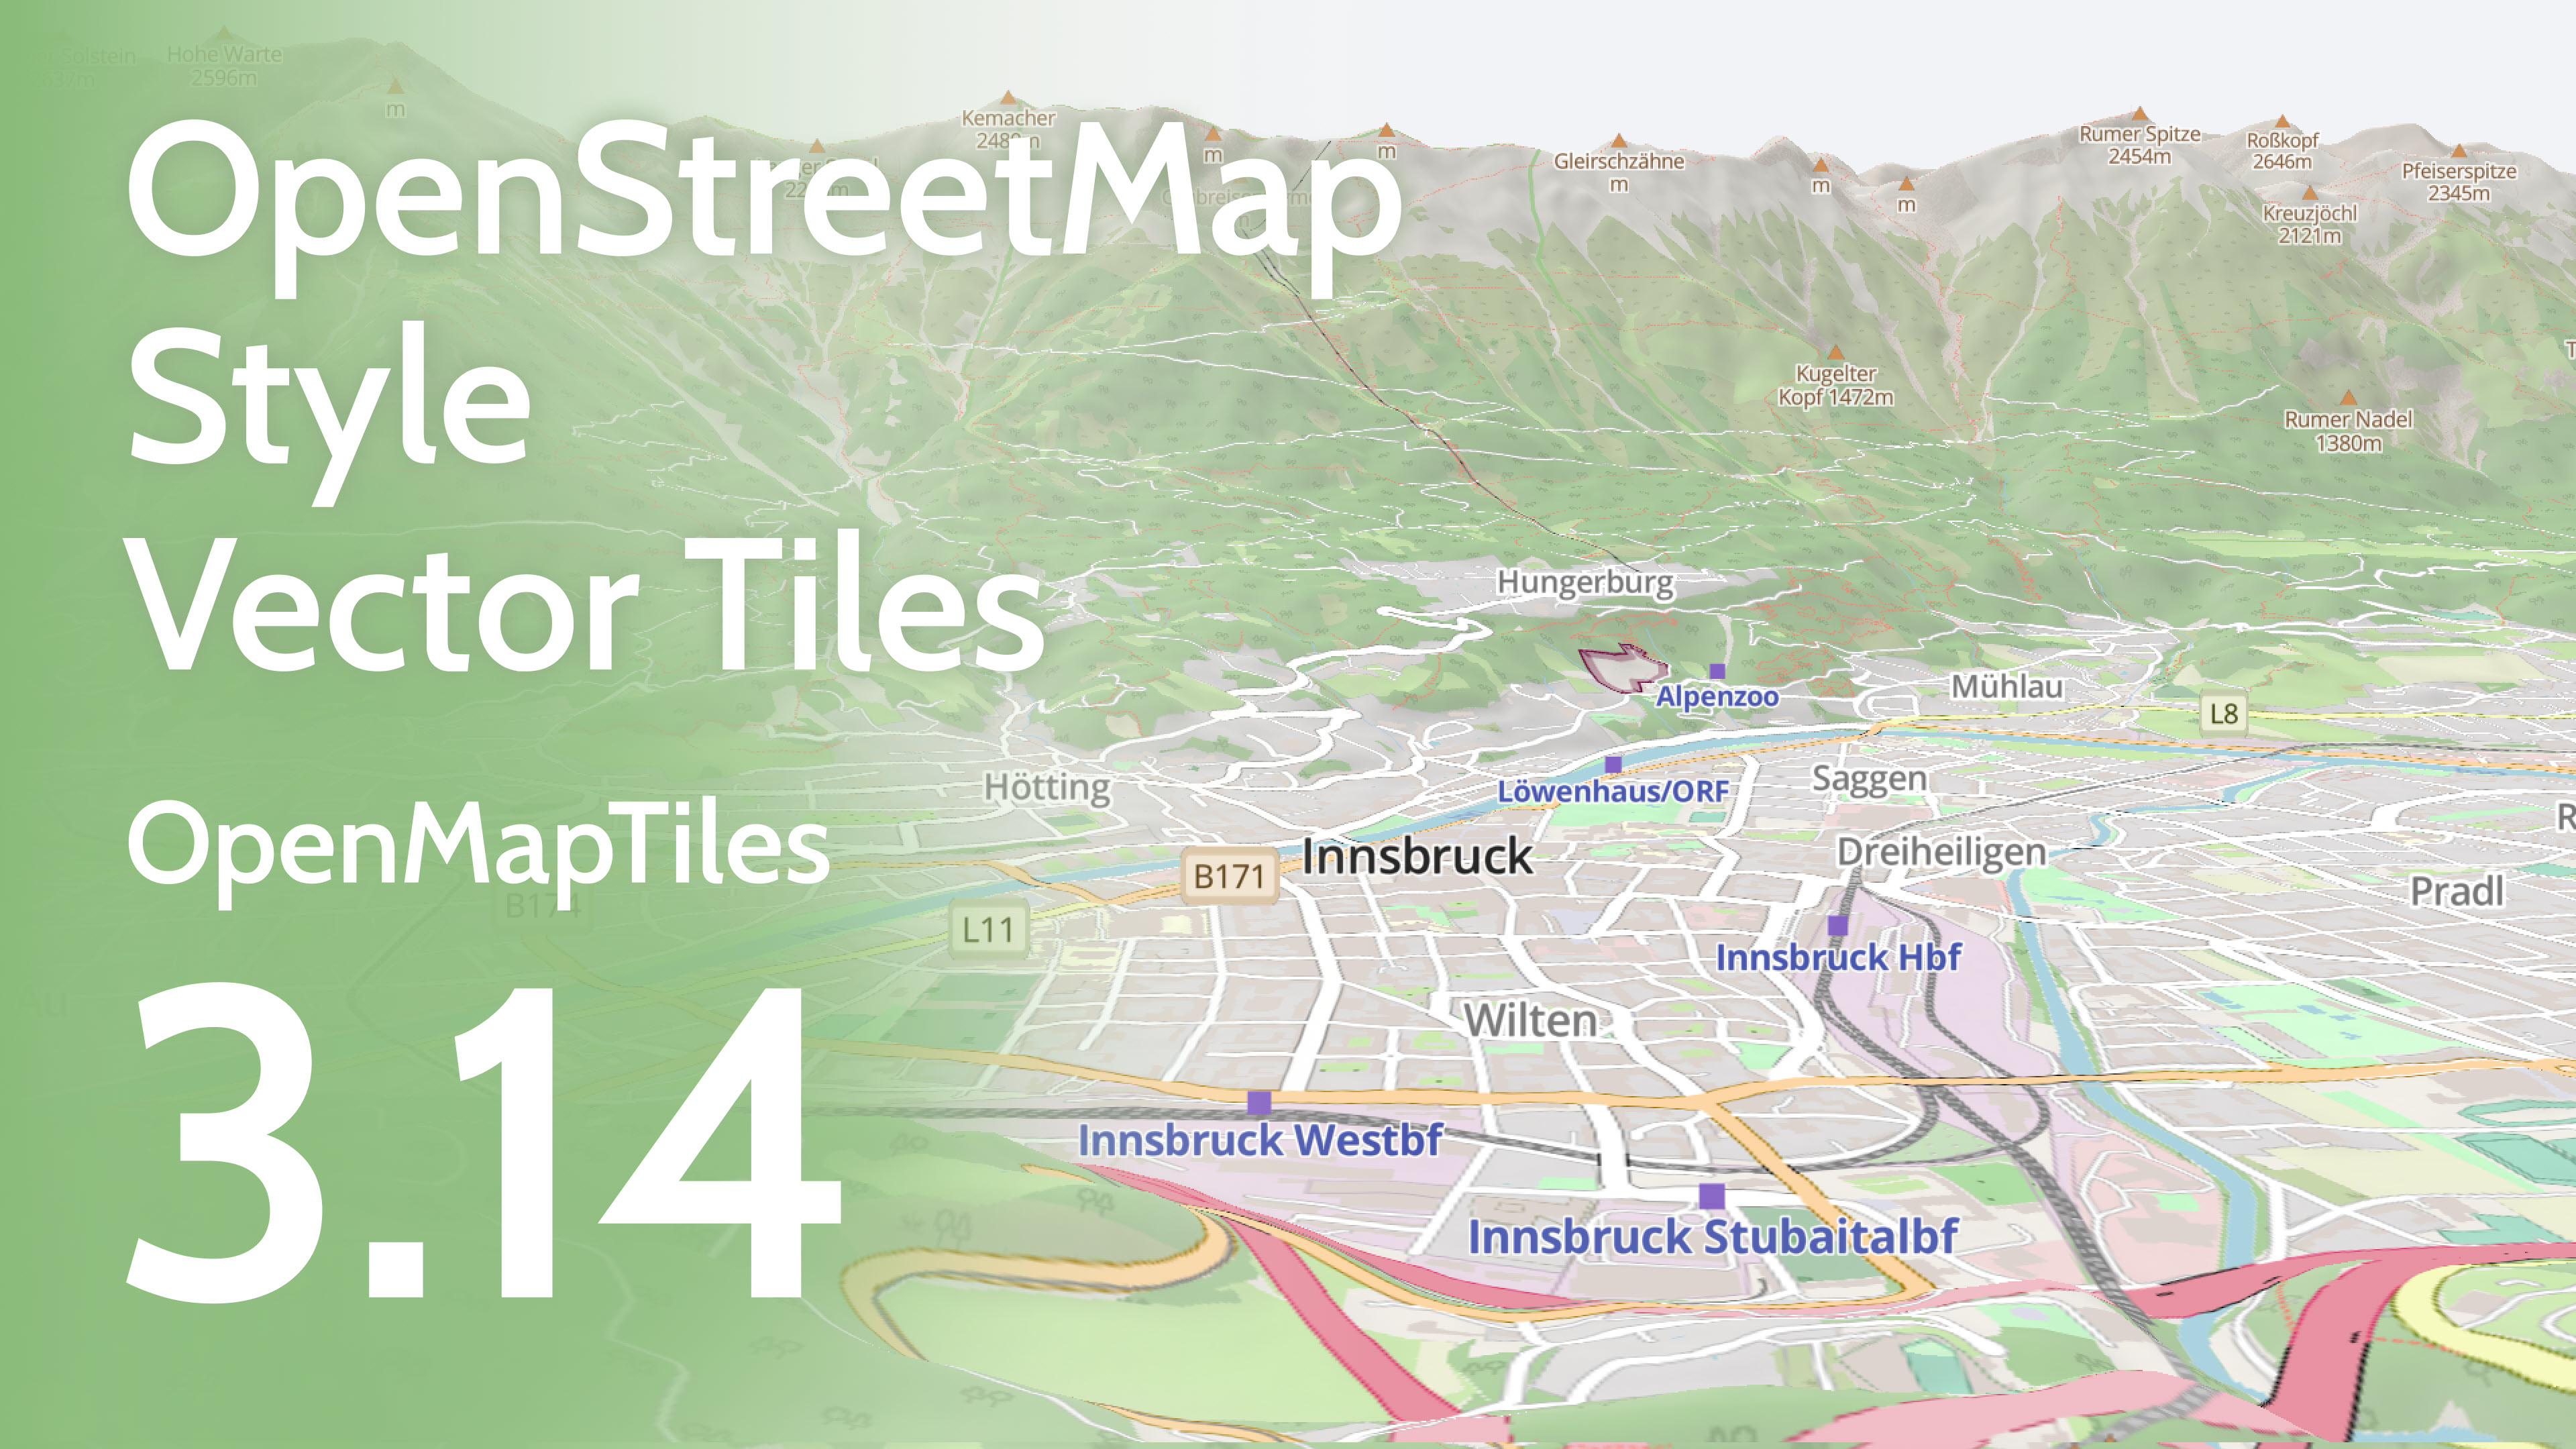 OpenMapTiles 3.14: New OpenStreetMap Style shows all the features image